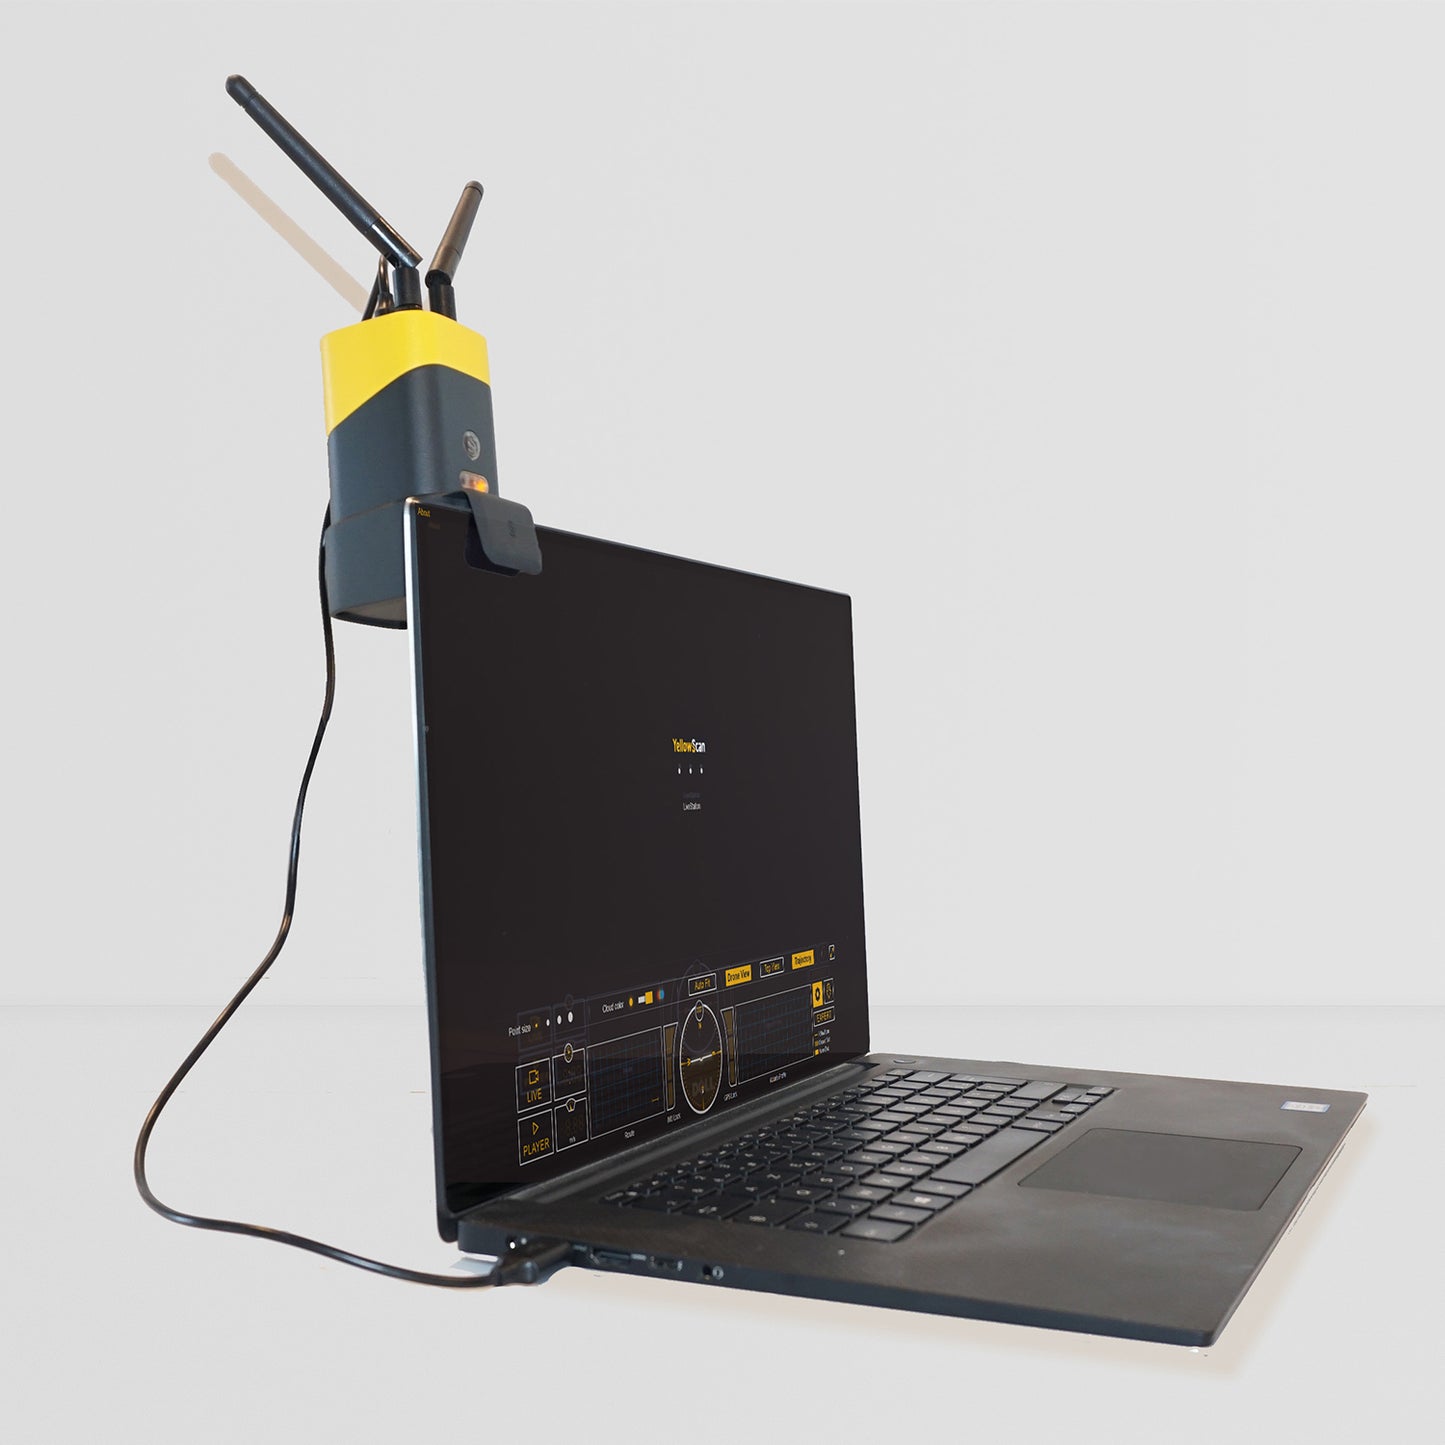 YellowScan LiveStation visualisation software and  900 MHz serial radio-modems